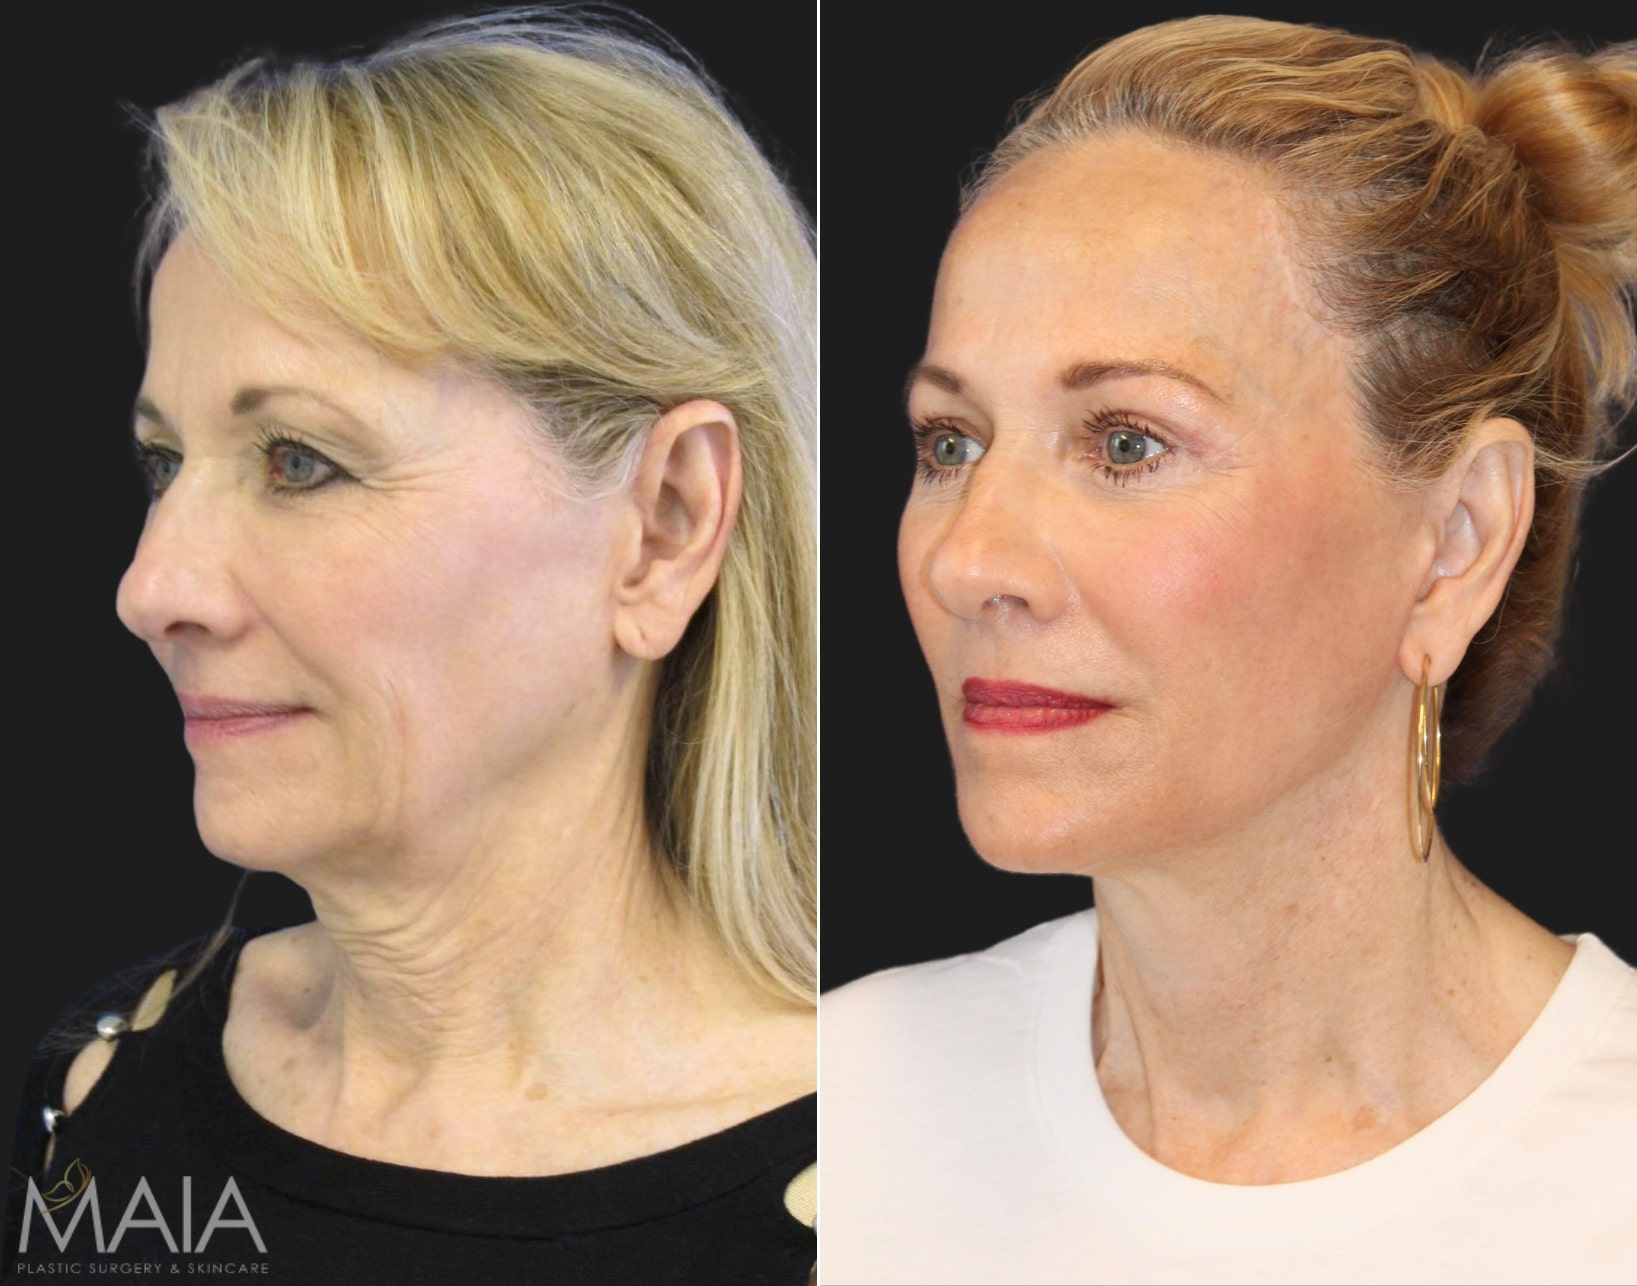 APPROVED-ANGLE-67-year-old-before-and-1-year-after-comprehensive-facial-rejuvenation.jpg